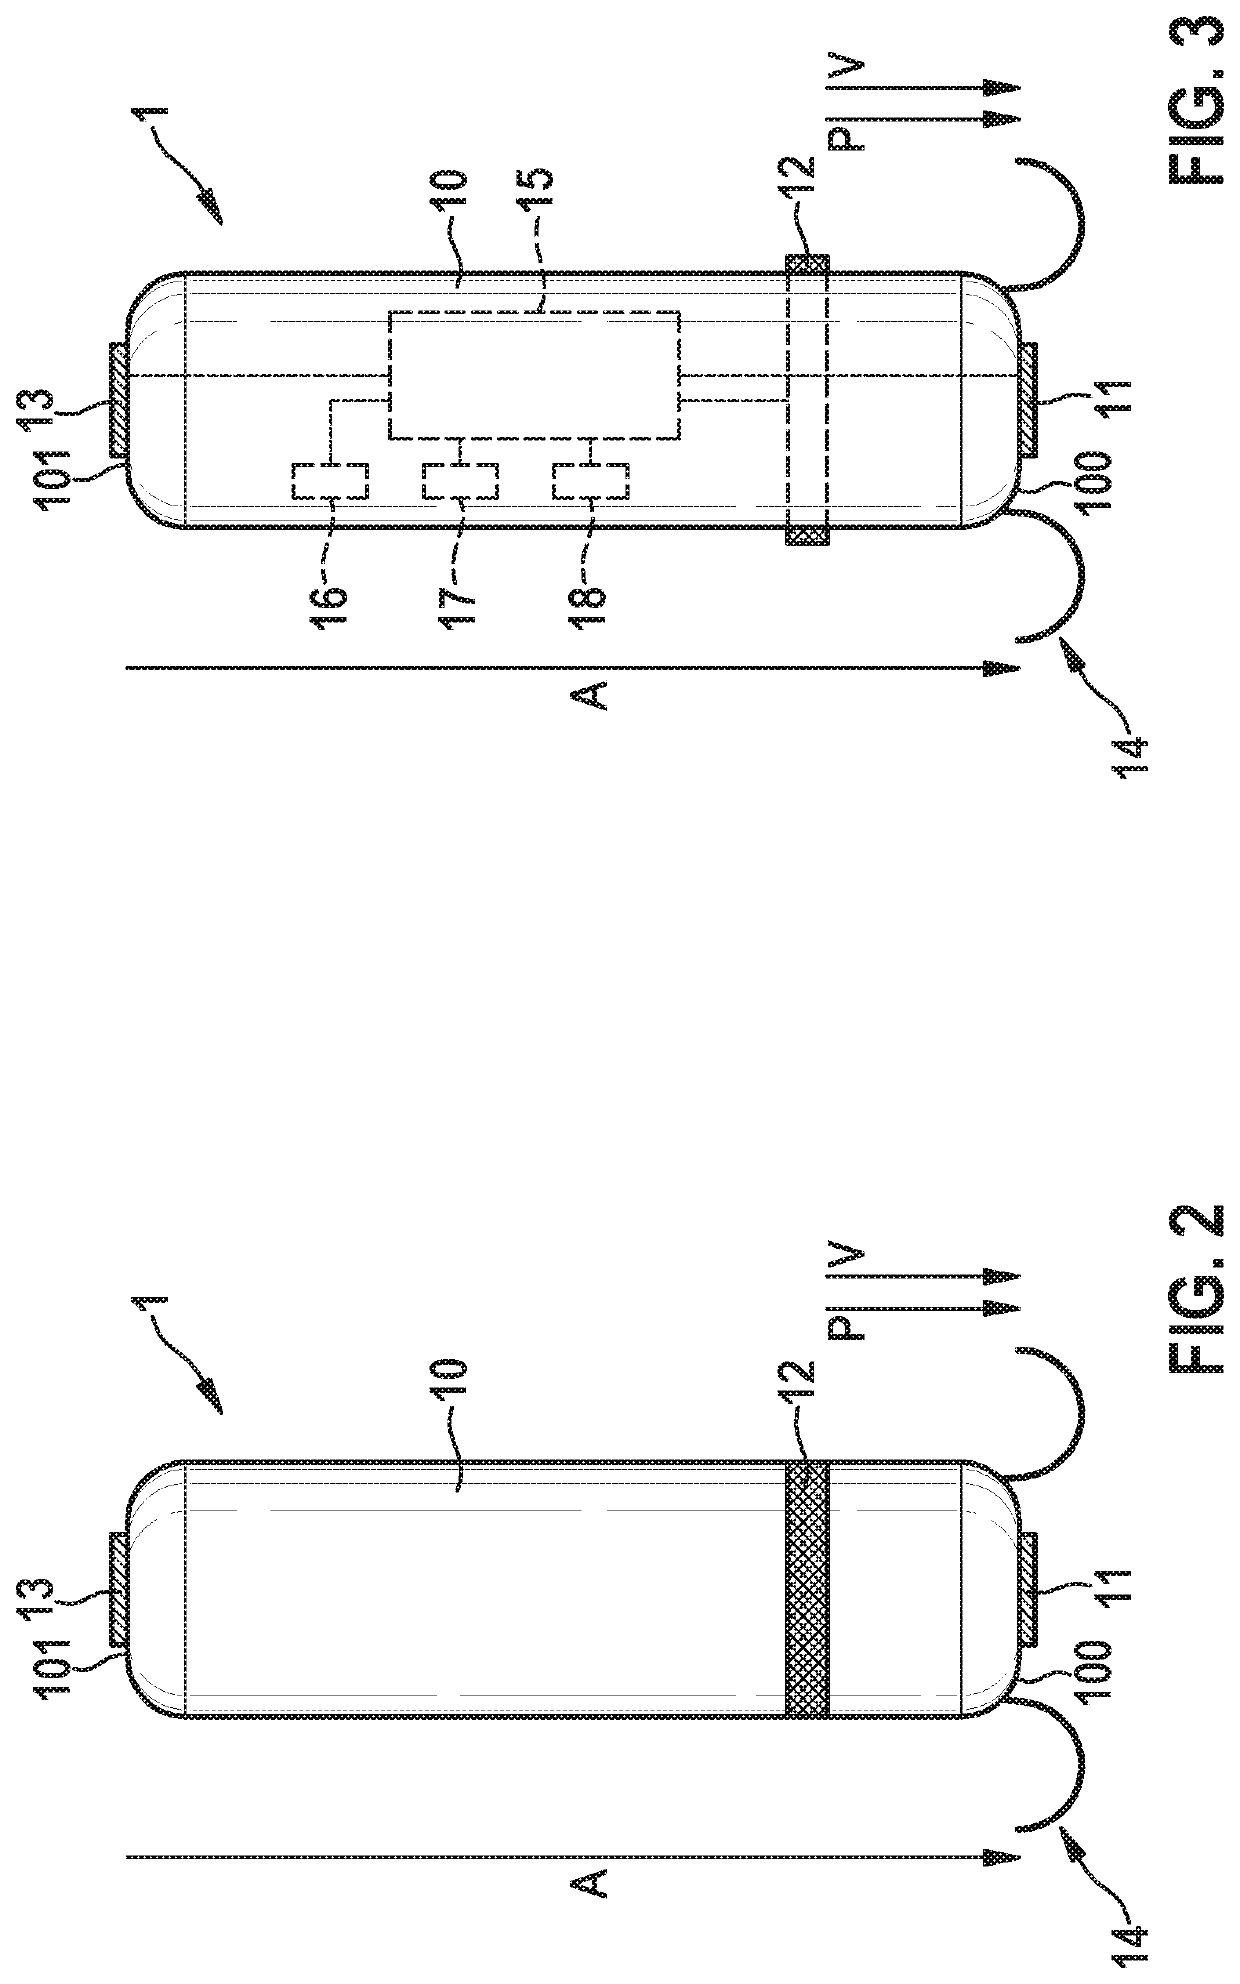 Leadless cardiac pacemaker device configured to provide intra-cardiac pacing